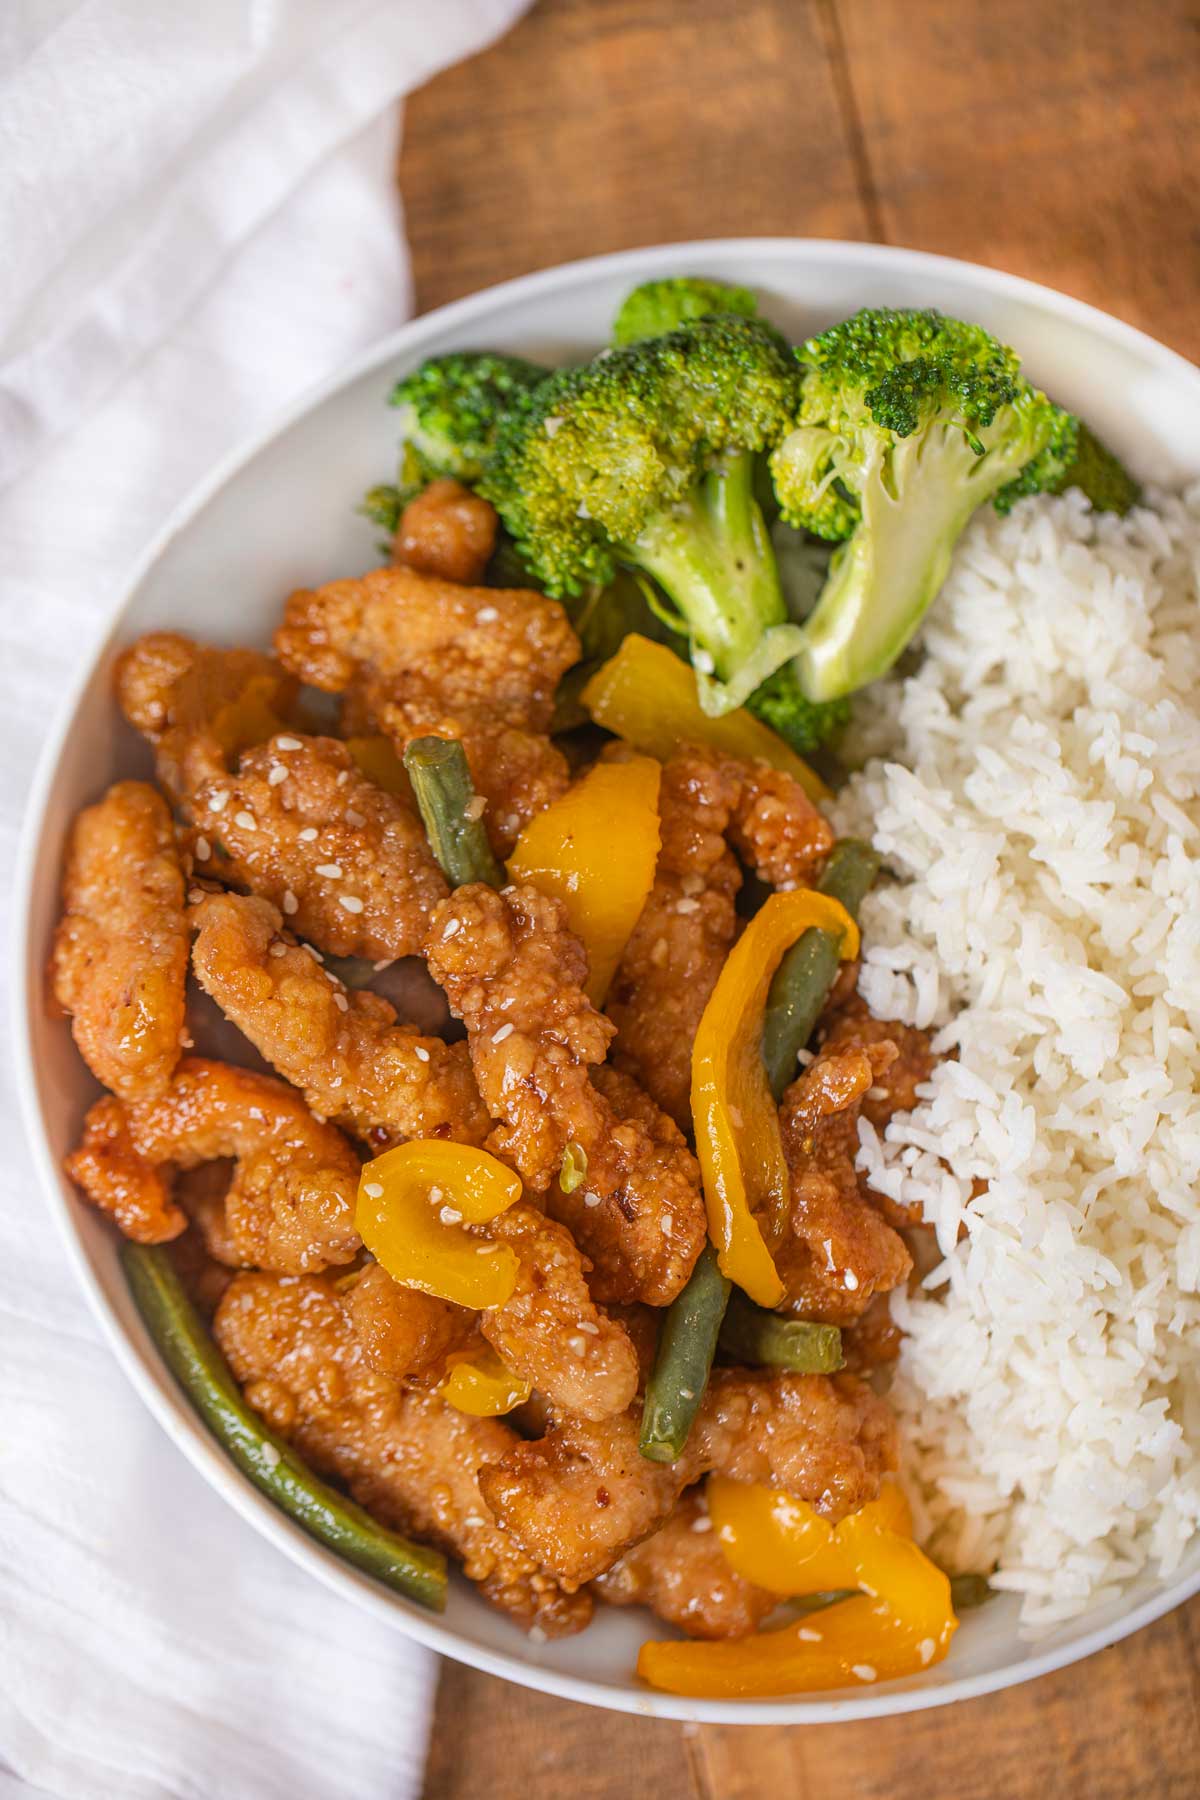 Honey Sesame Chicken Breast from Panda Express with steamed rice and broccoli in white bowl